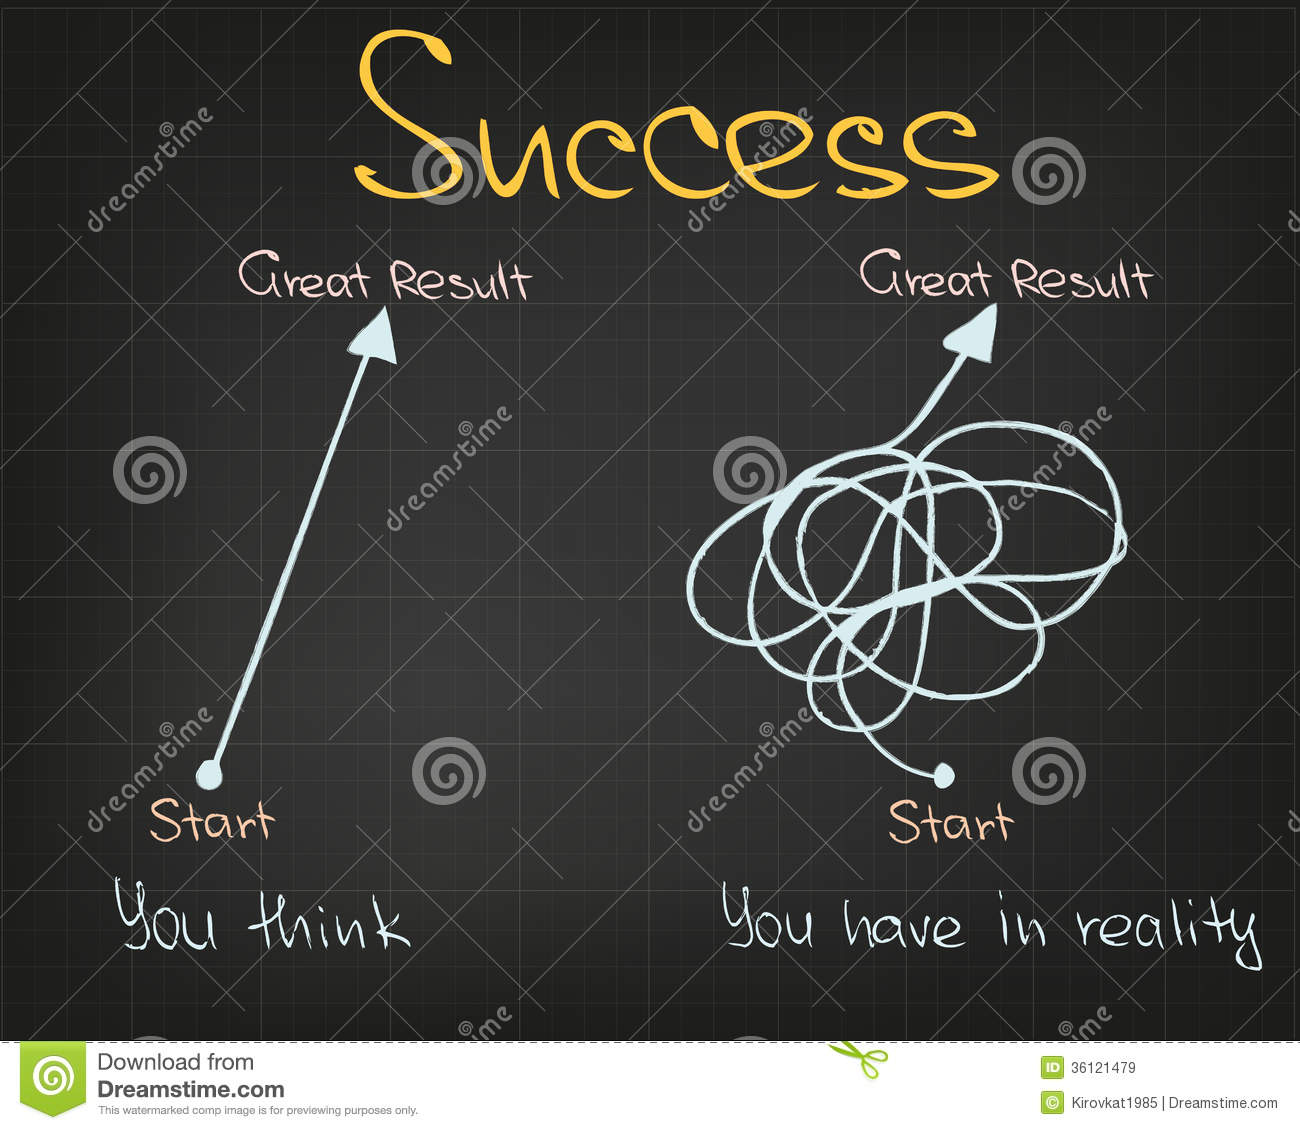 Successful Model Of Business In Reaching Goals And Success